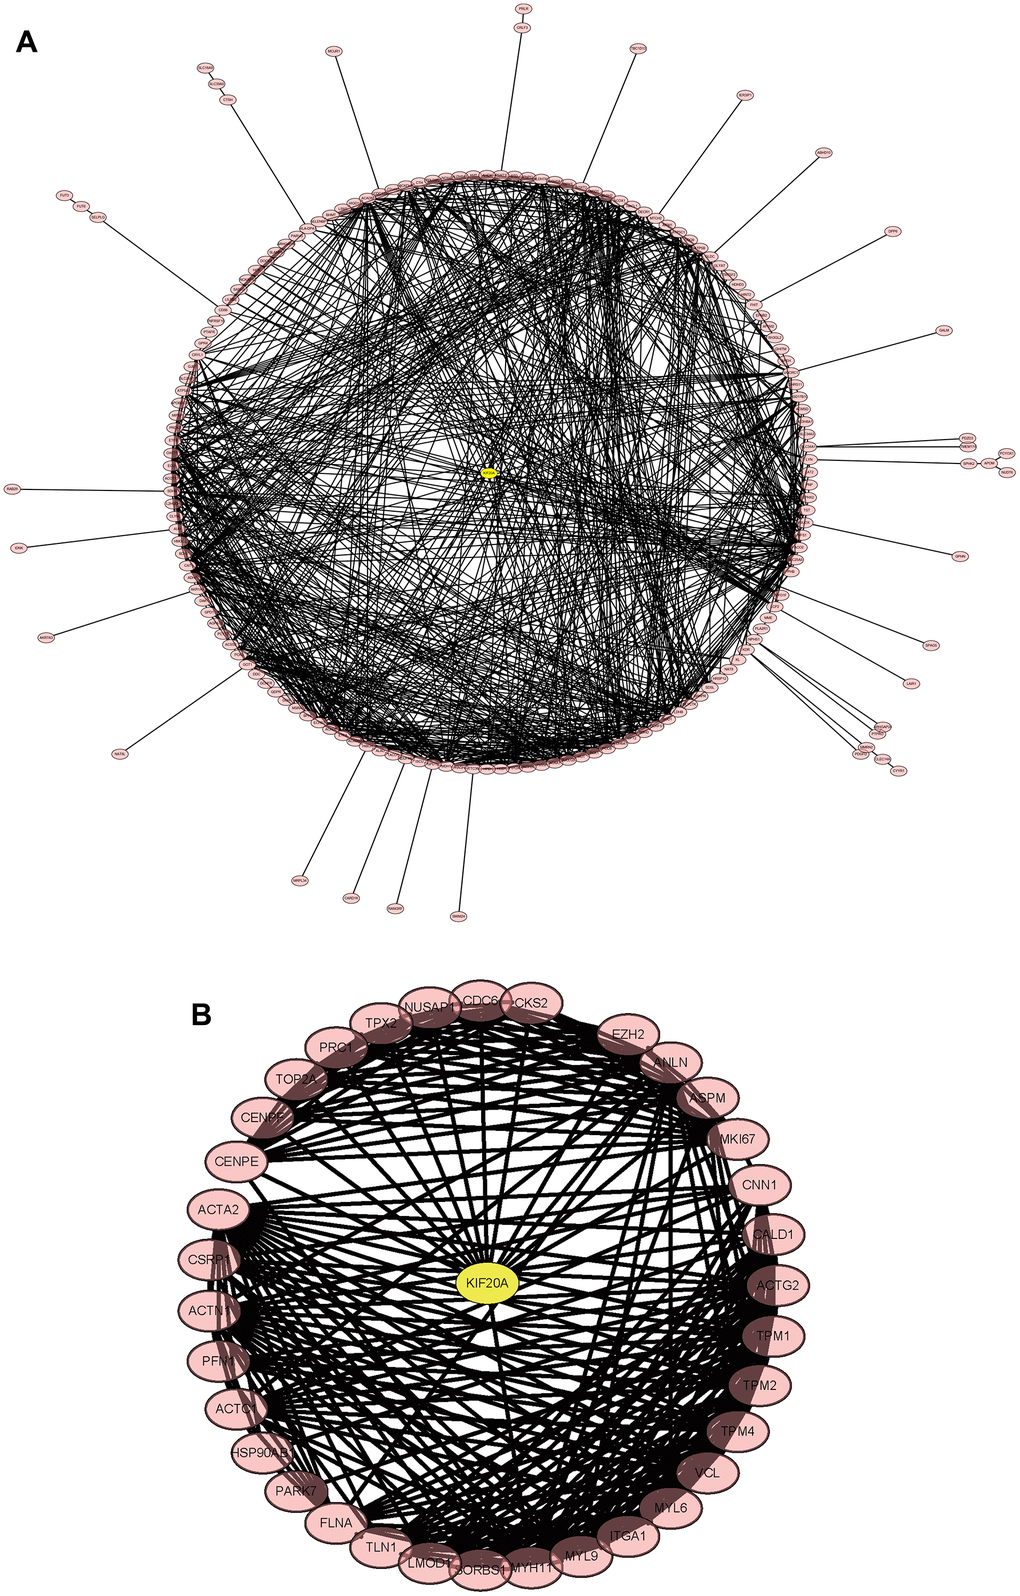 Construction and analysis of the protein-protein interaction (PPI) network. (A) GSEGSE14762, GSE53757. (B) GSE121711.